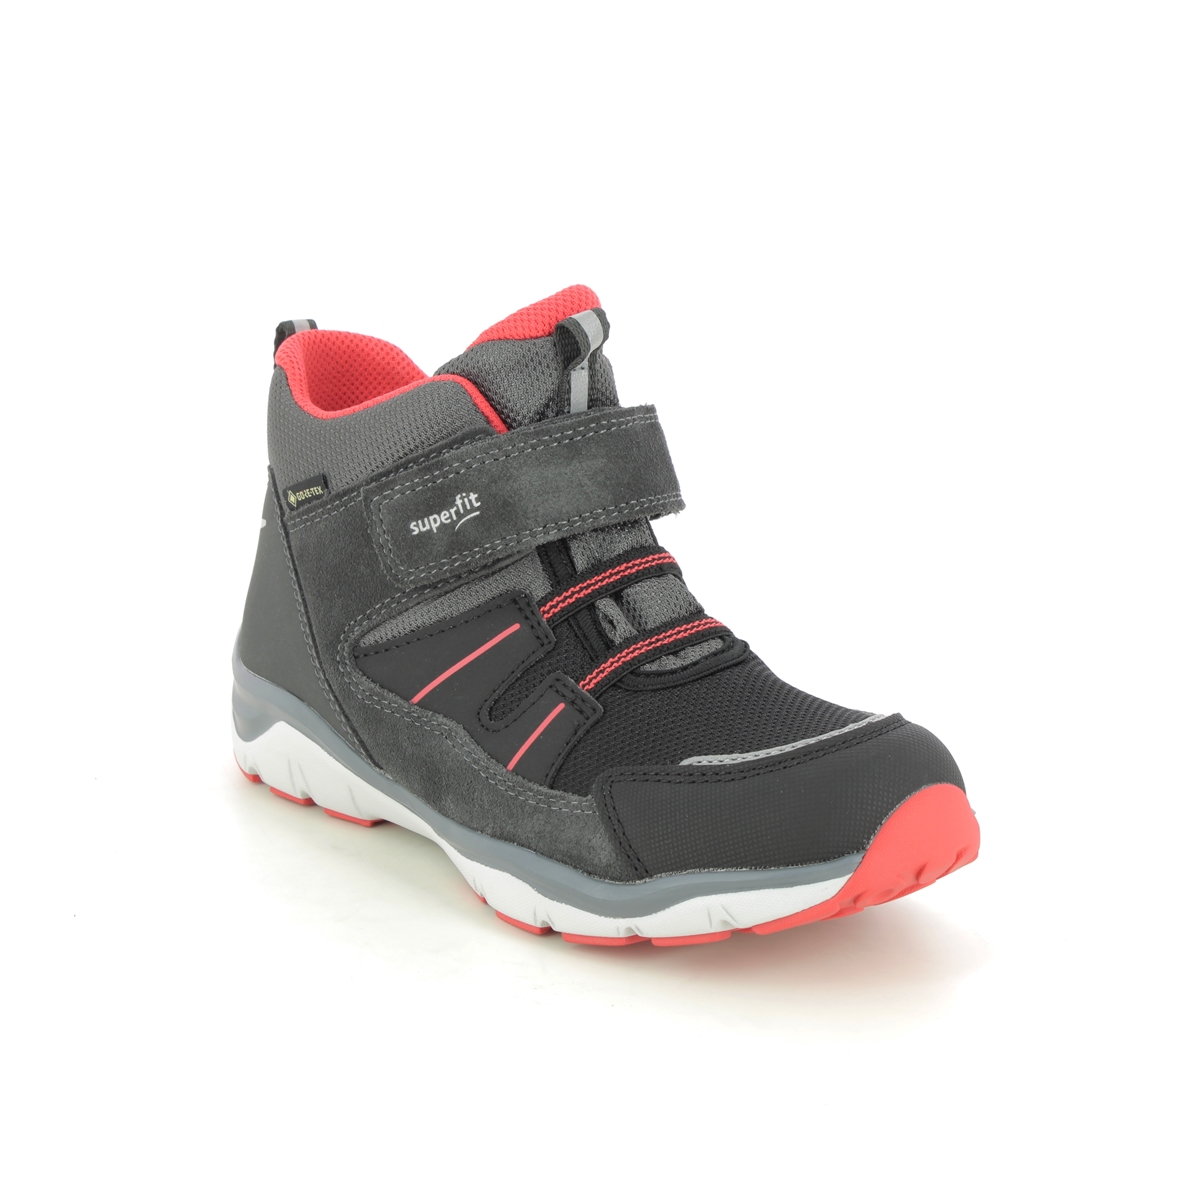 Superfit Sport5 Gore Tex Grey Red Kids Boys Boots 1000247-2000 In Size 34 In Plain Grey Red For kids